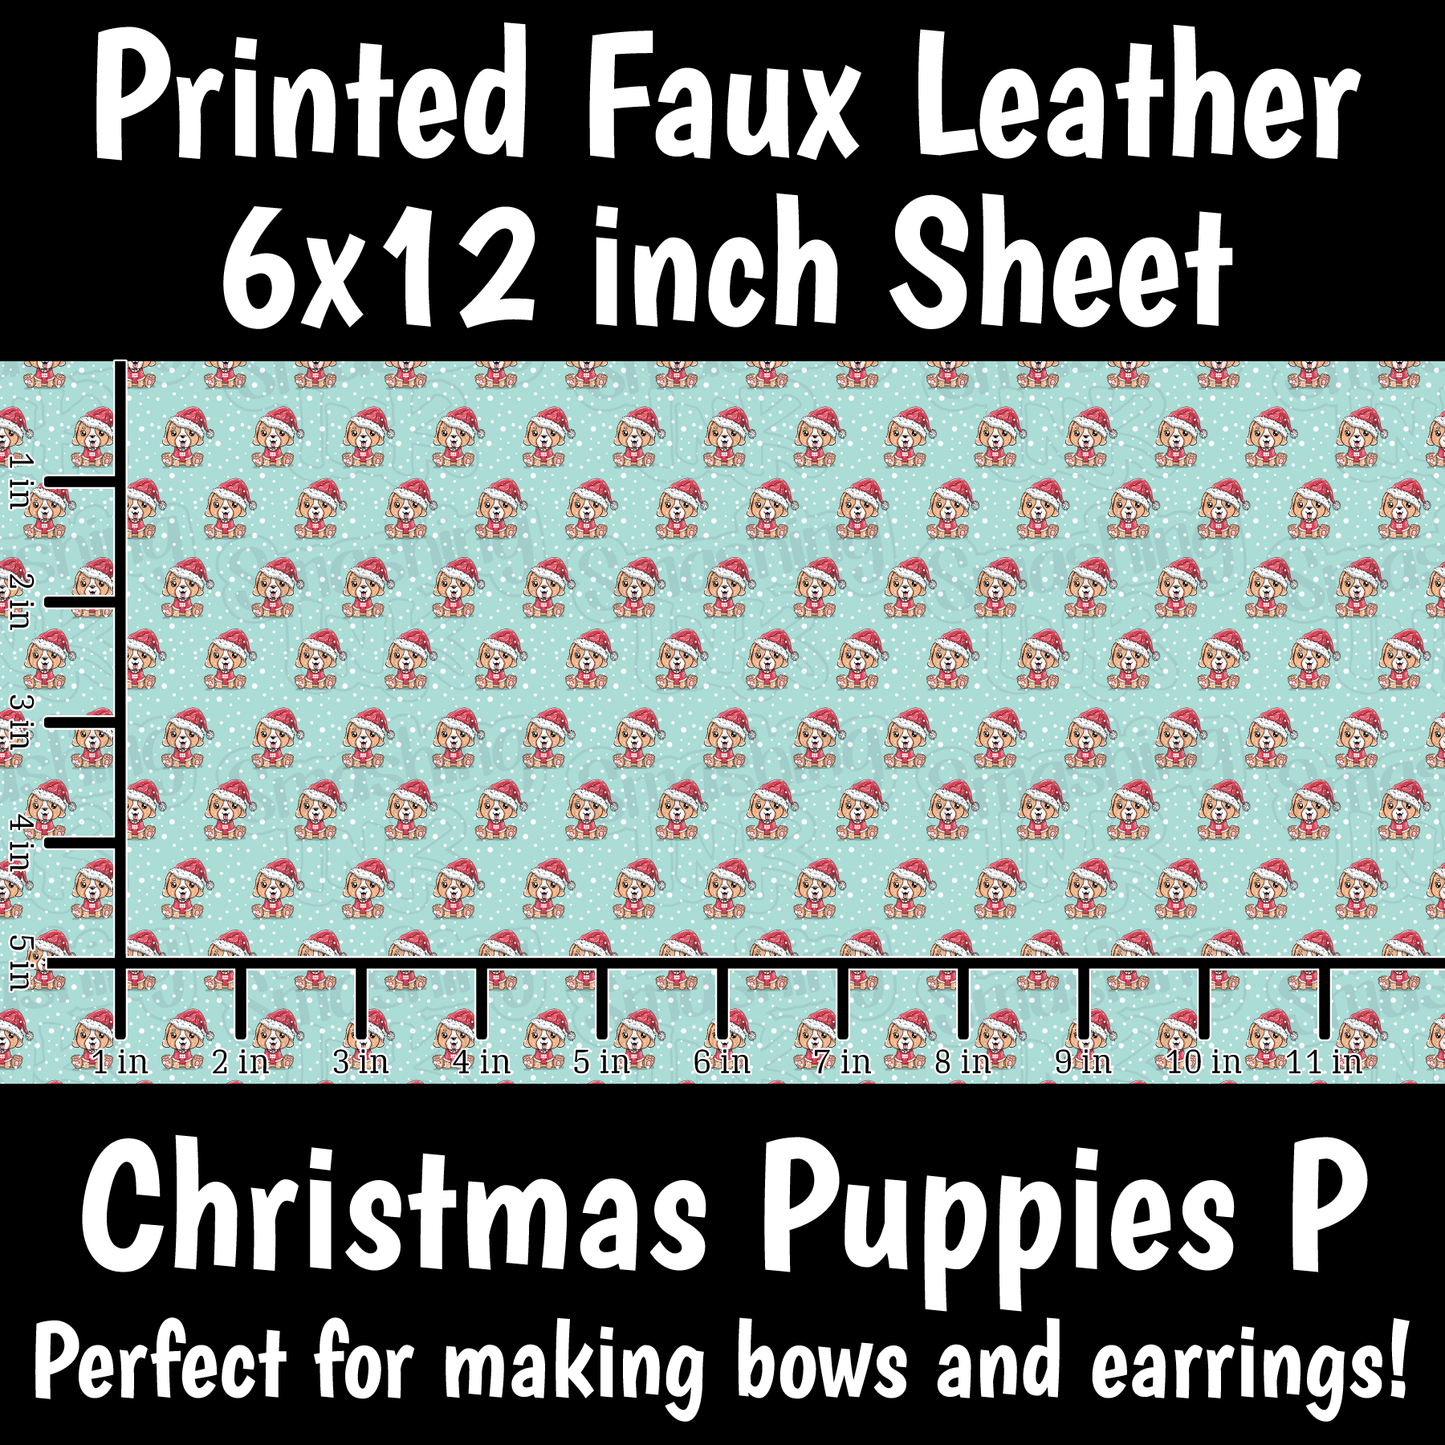 Christmas Puppies P - Faux Leather Sheet (SHIPS IN 3 BUS DAYS)